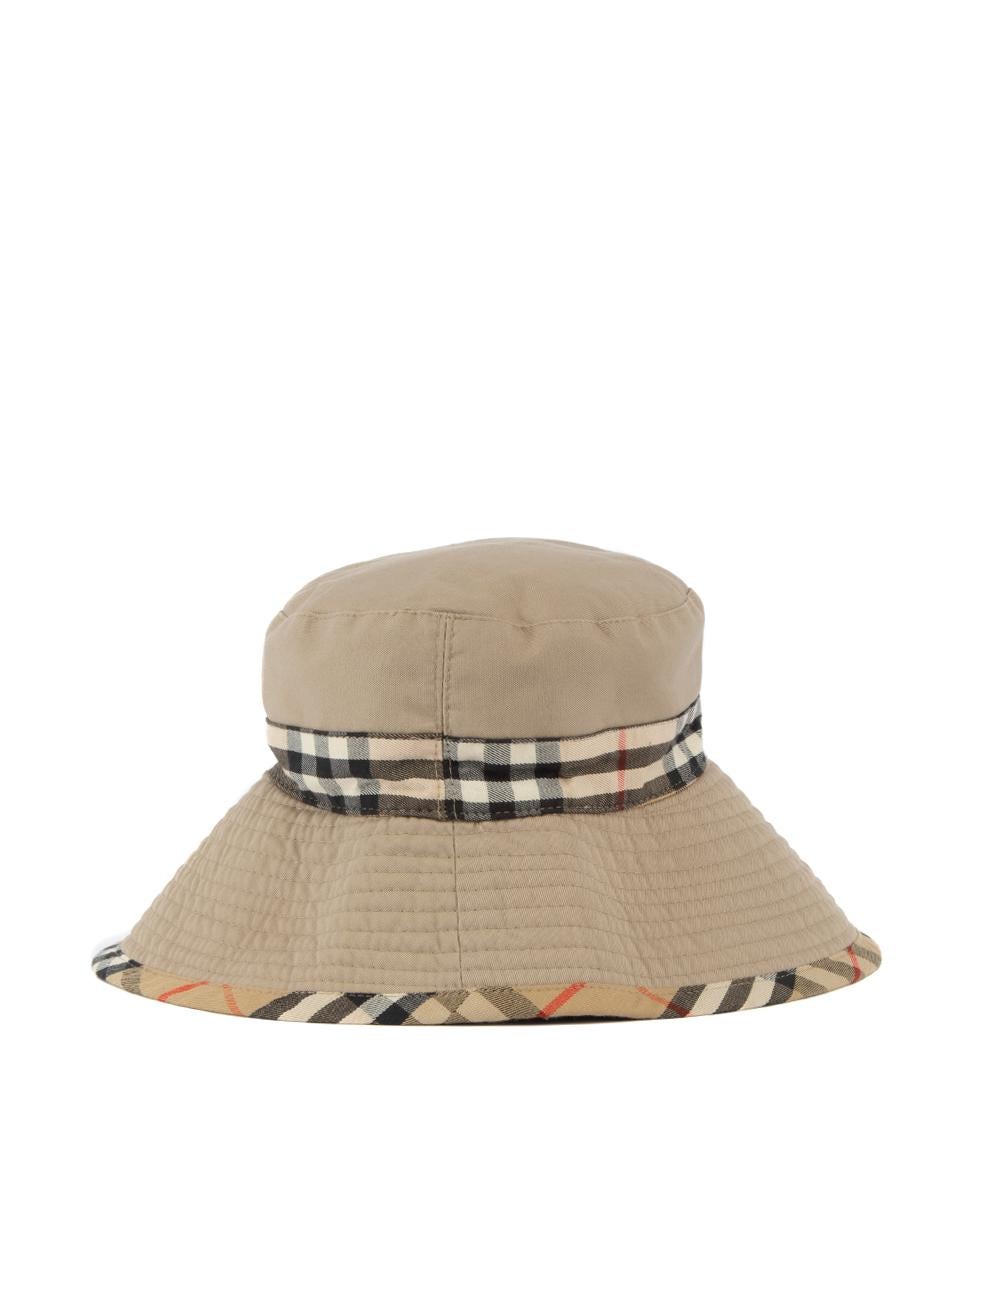 burberry trapper hat